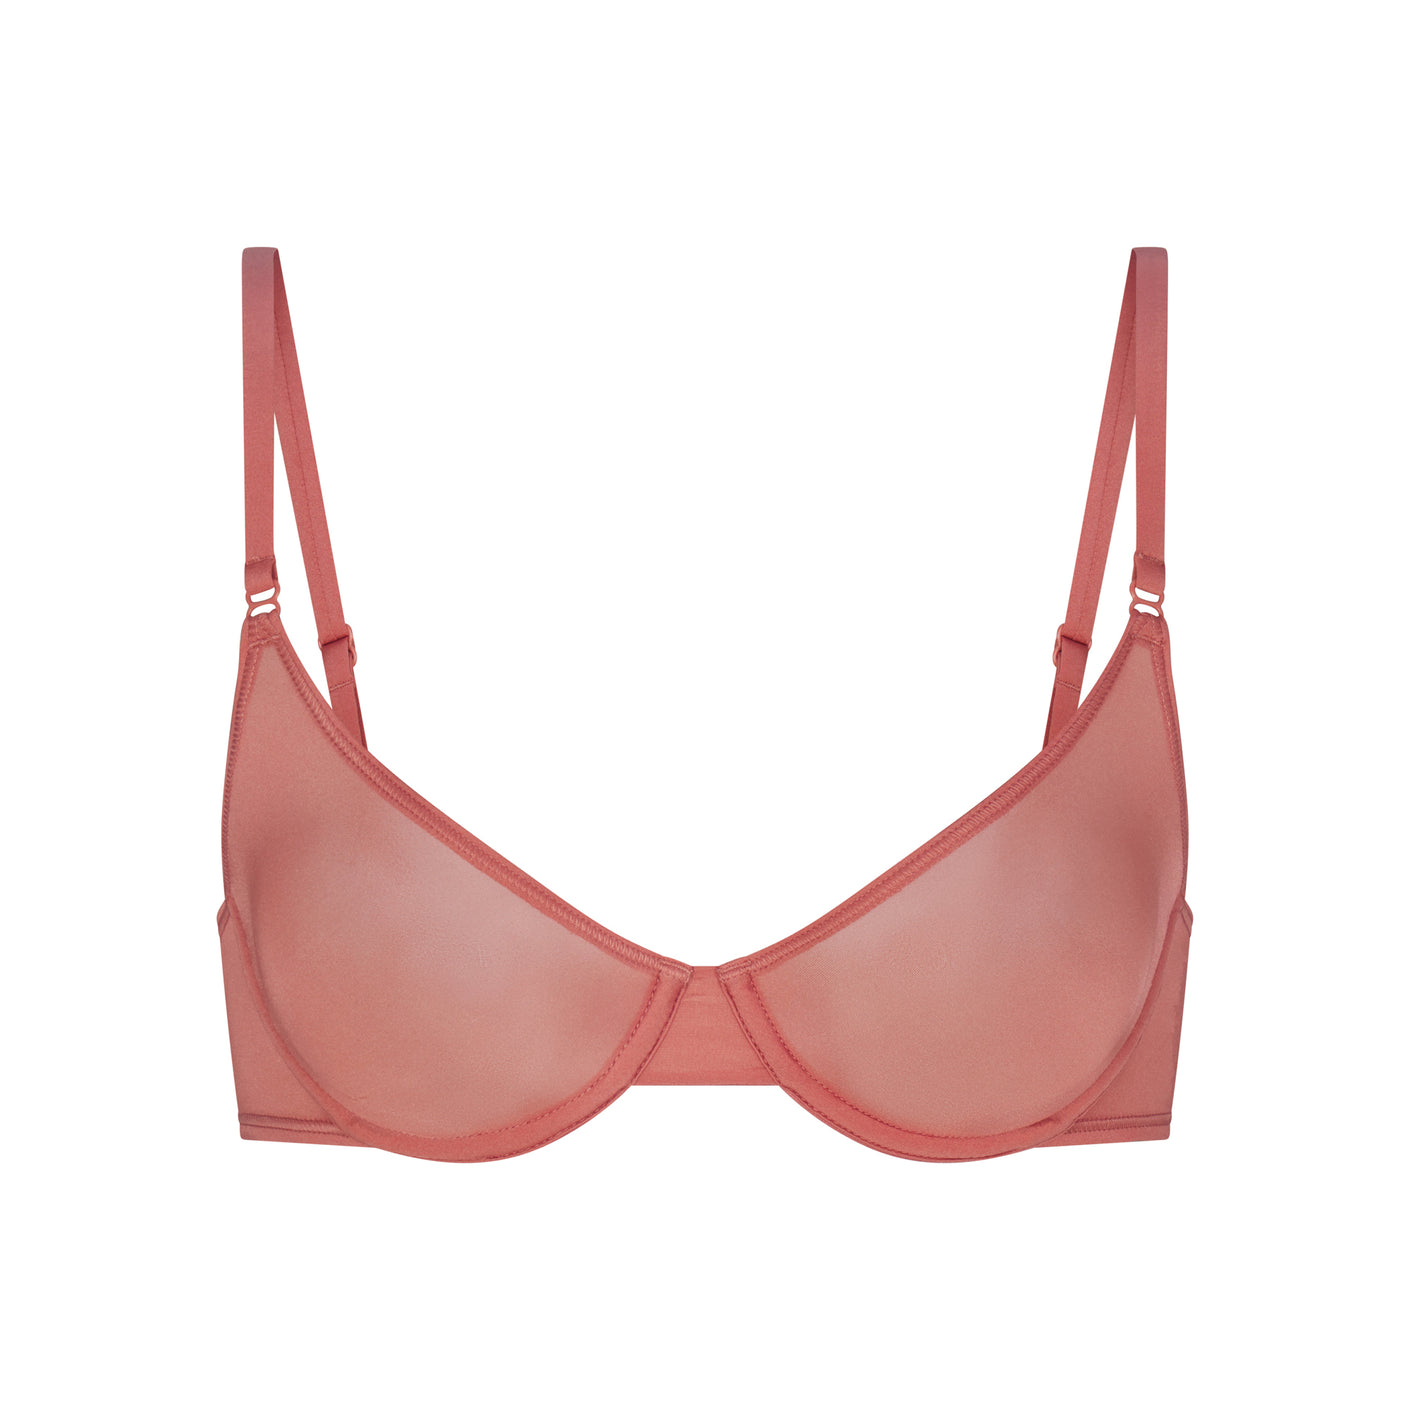 SKIMS SCOOP BRA mesh skim Size undefined - $54 New With Tags - From Rachel